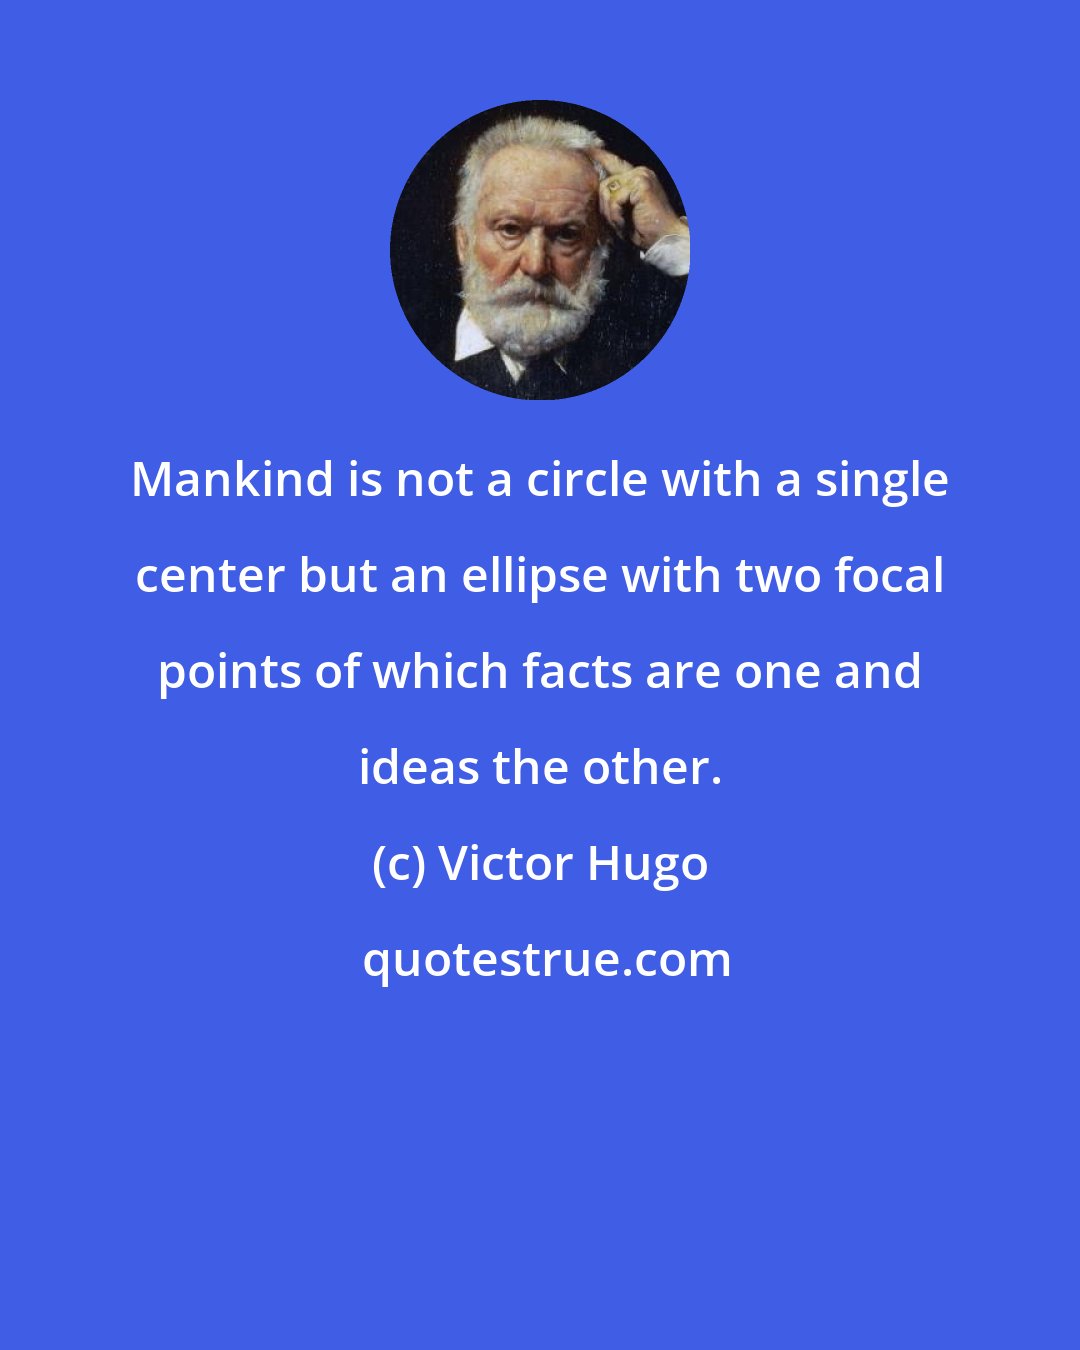 Victor Hugo: Mankind is not a circle with a single center but an ellipse with two focal points of which facts are one and ideas the other.